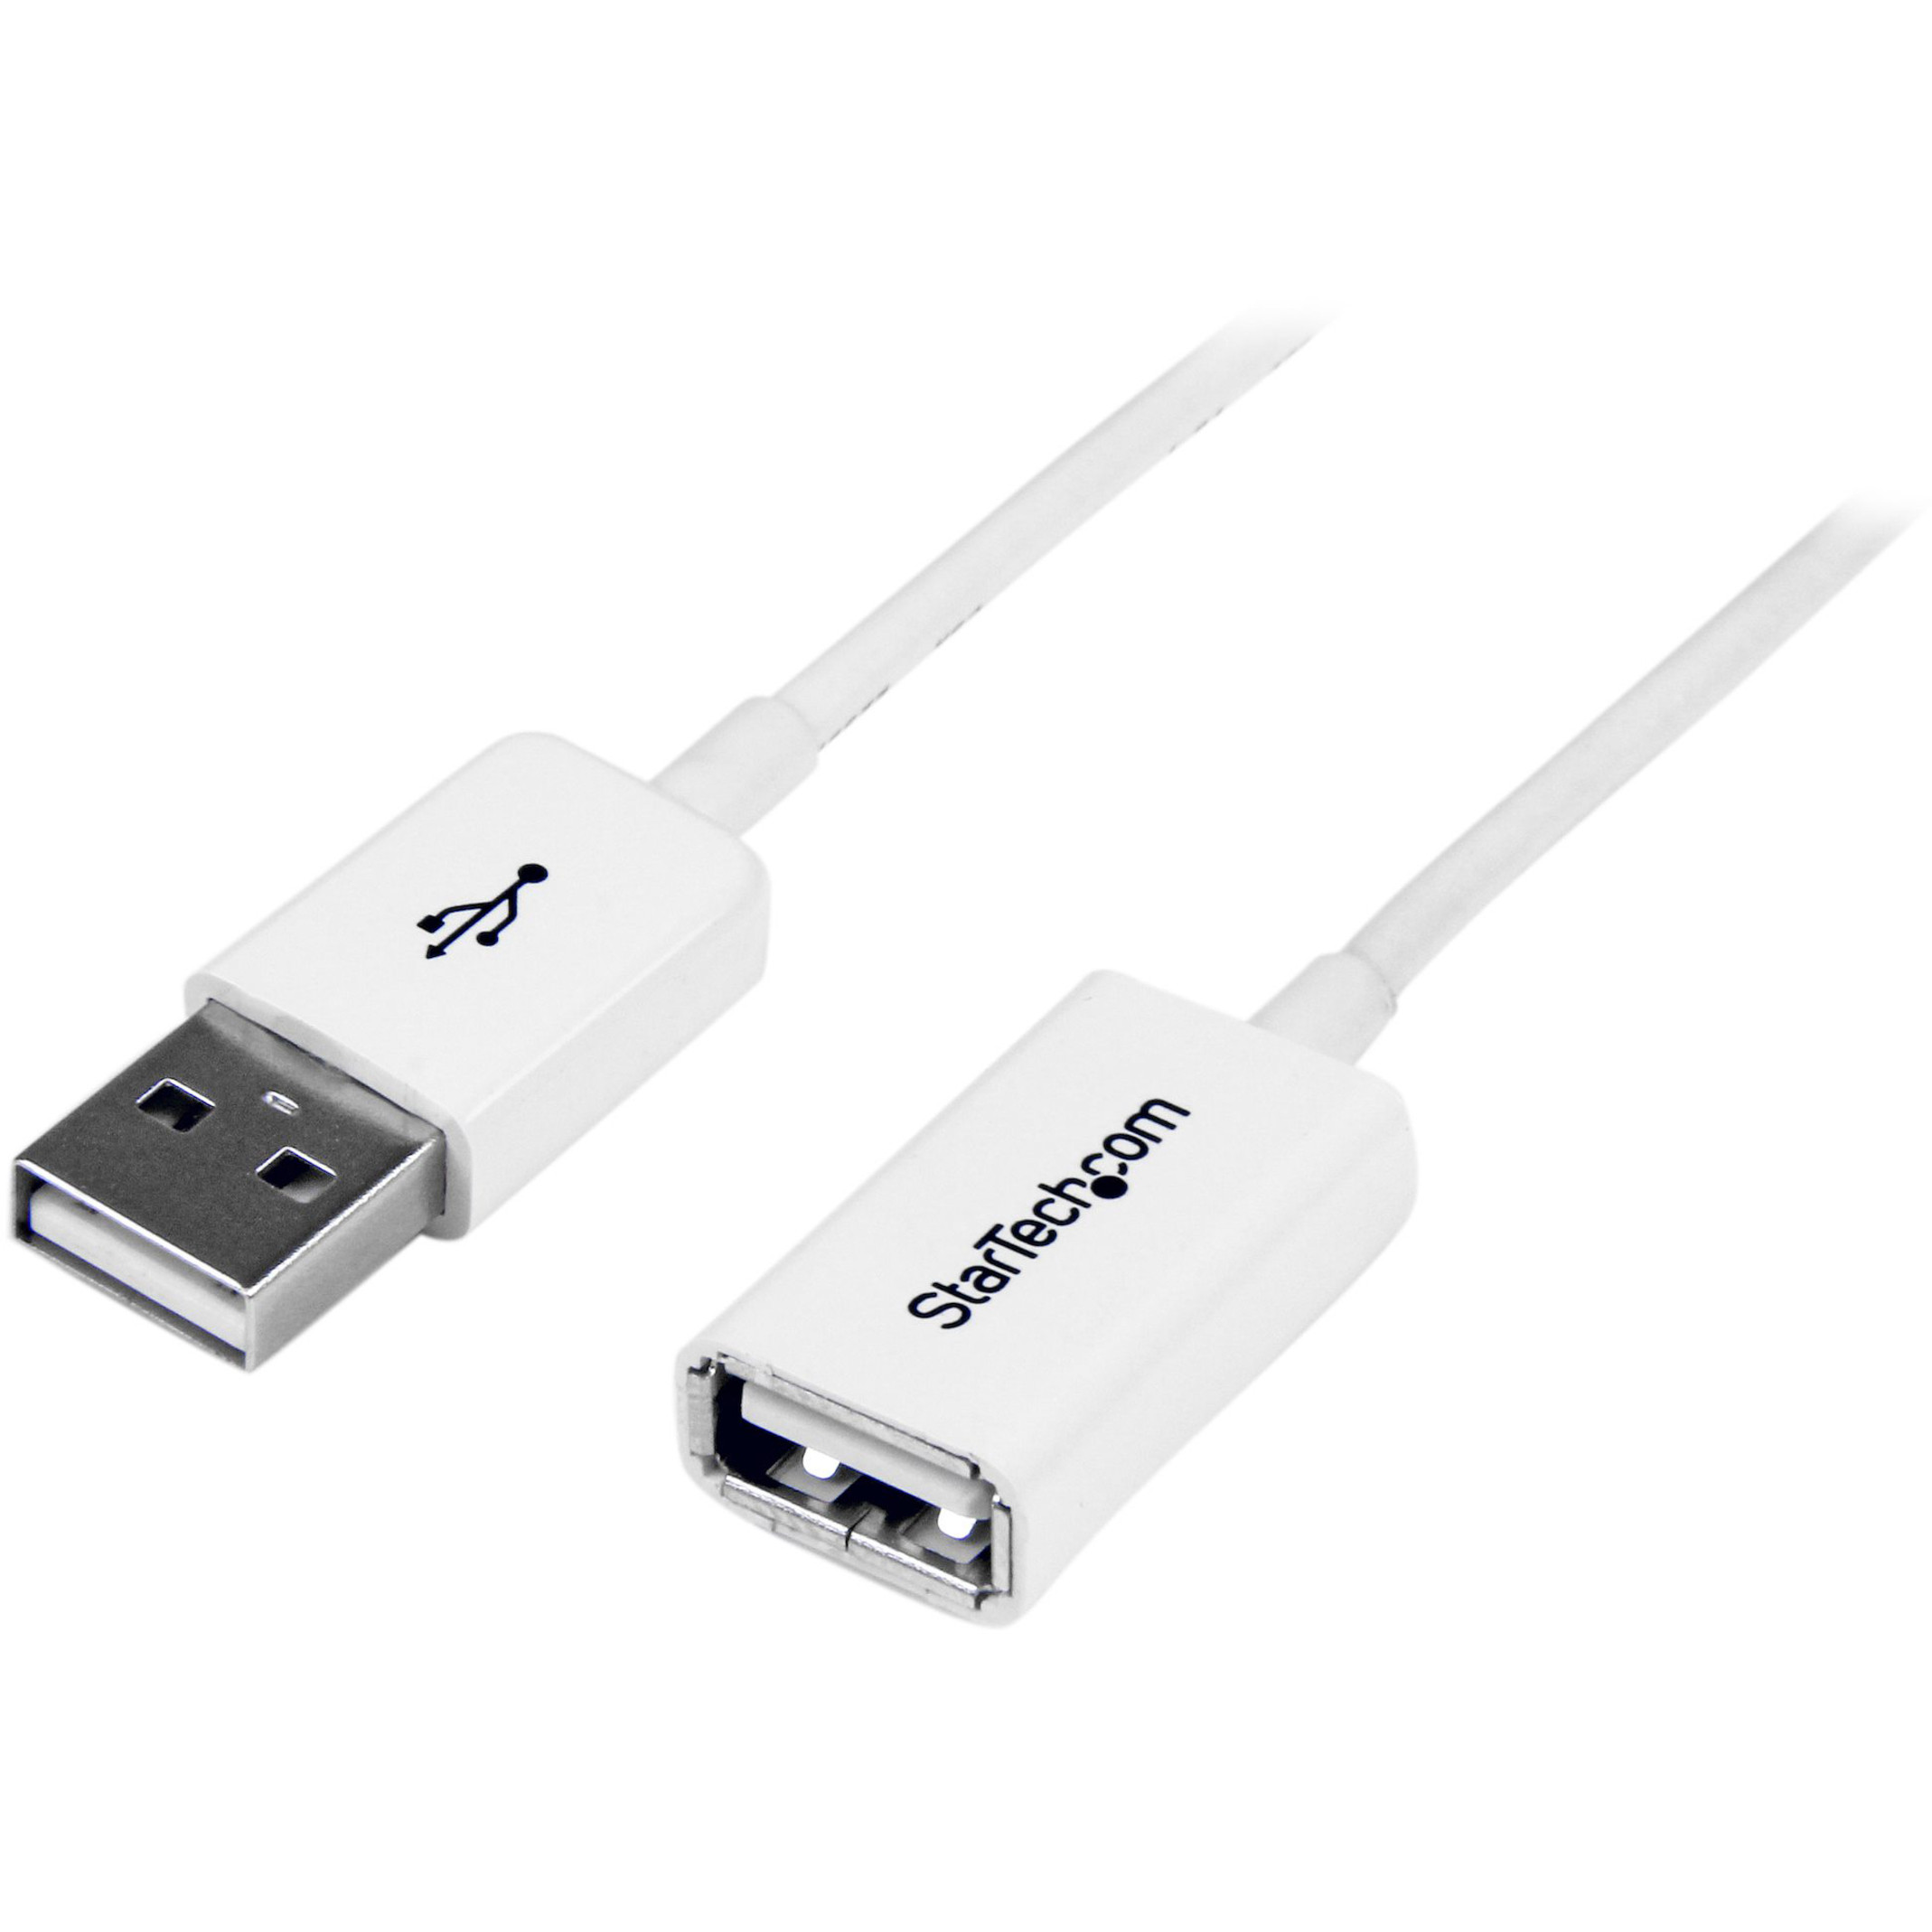 Startech .com 2m White USB 2.0 Extension Cable A to AM/FExtend the length of your 2.0 cable by up to 2mUSB Male to Female Cable... USBEXTPAA2MW - Corporate Armor